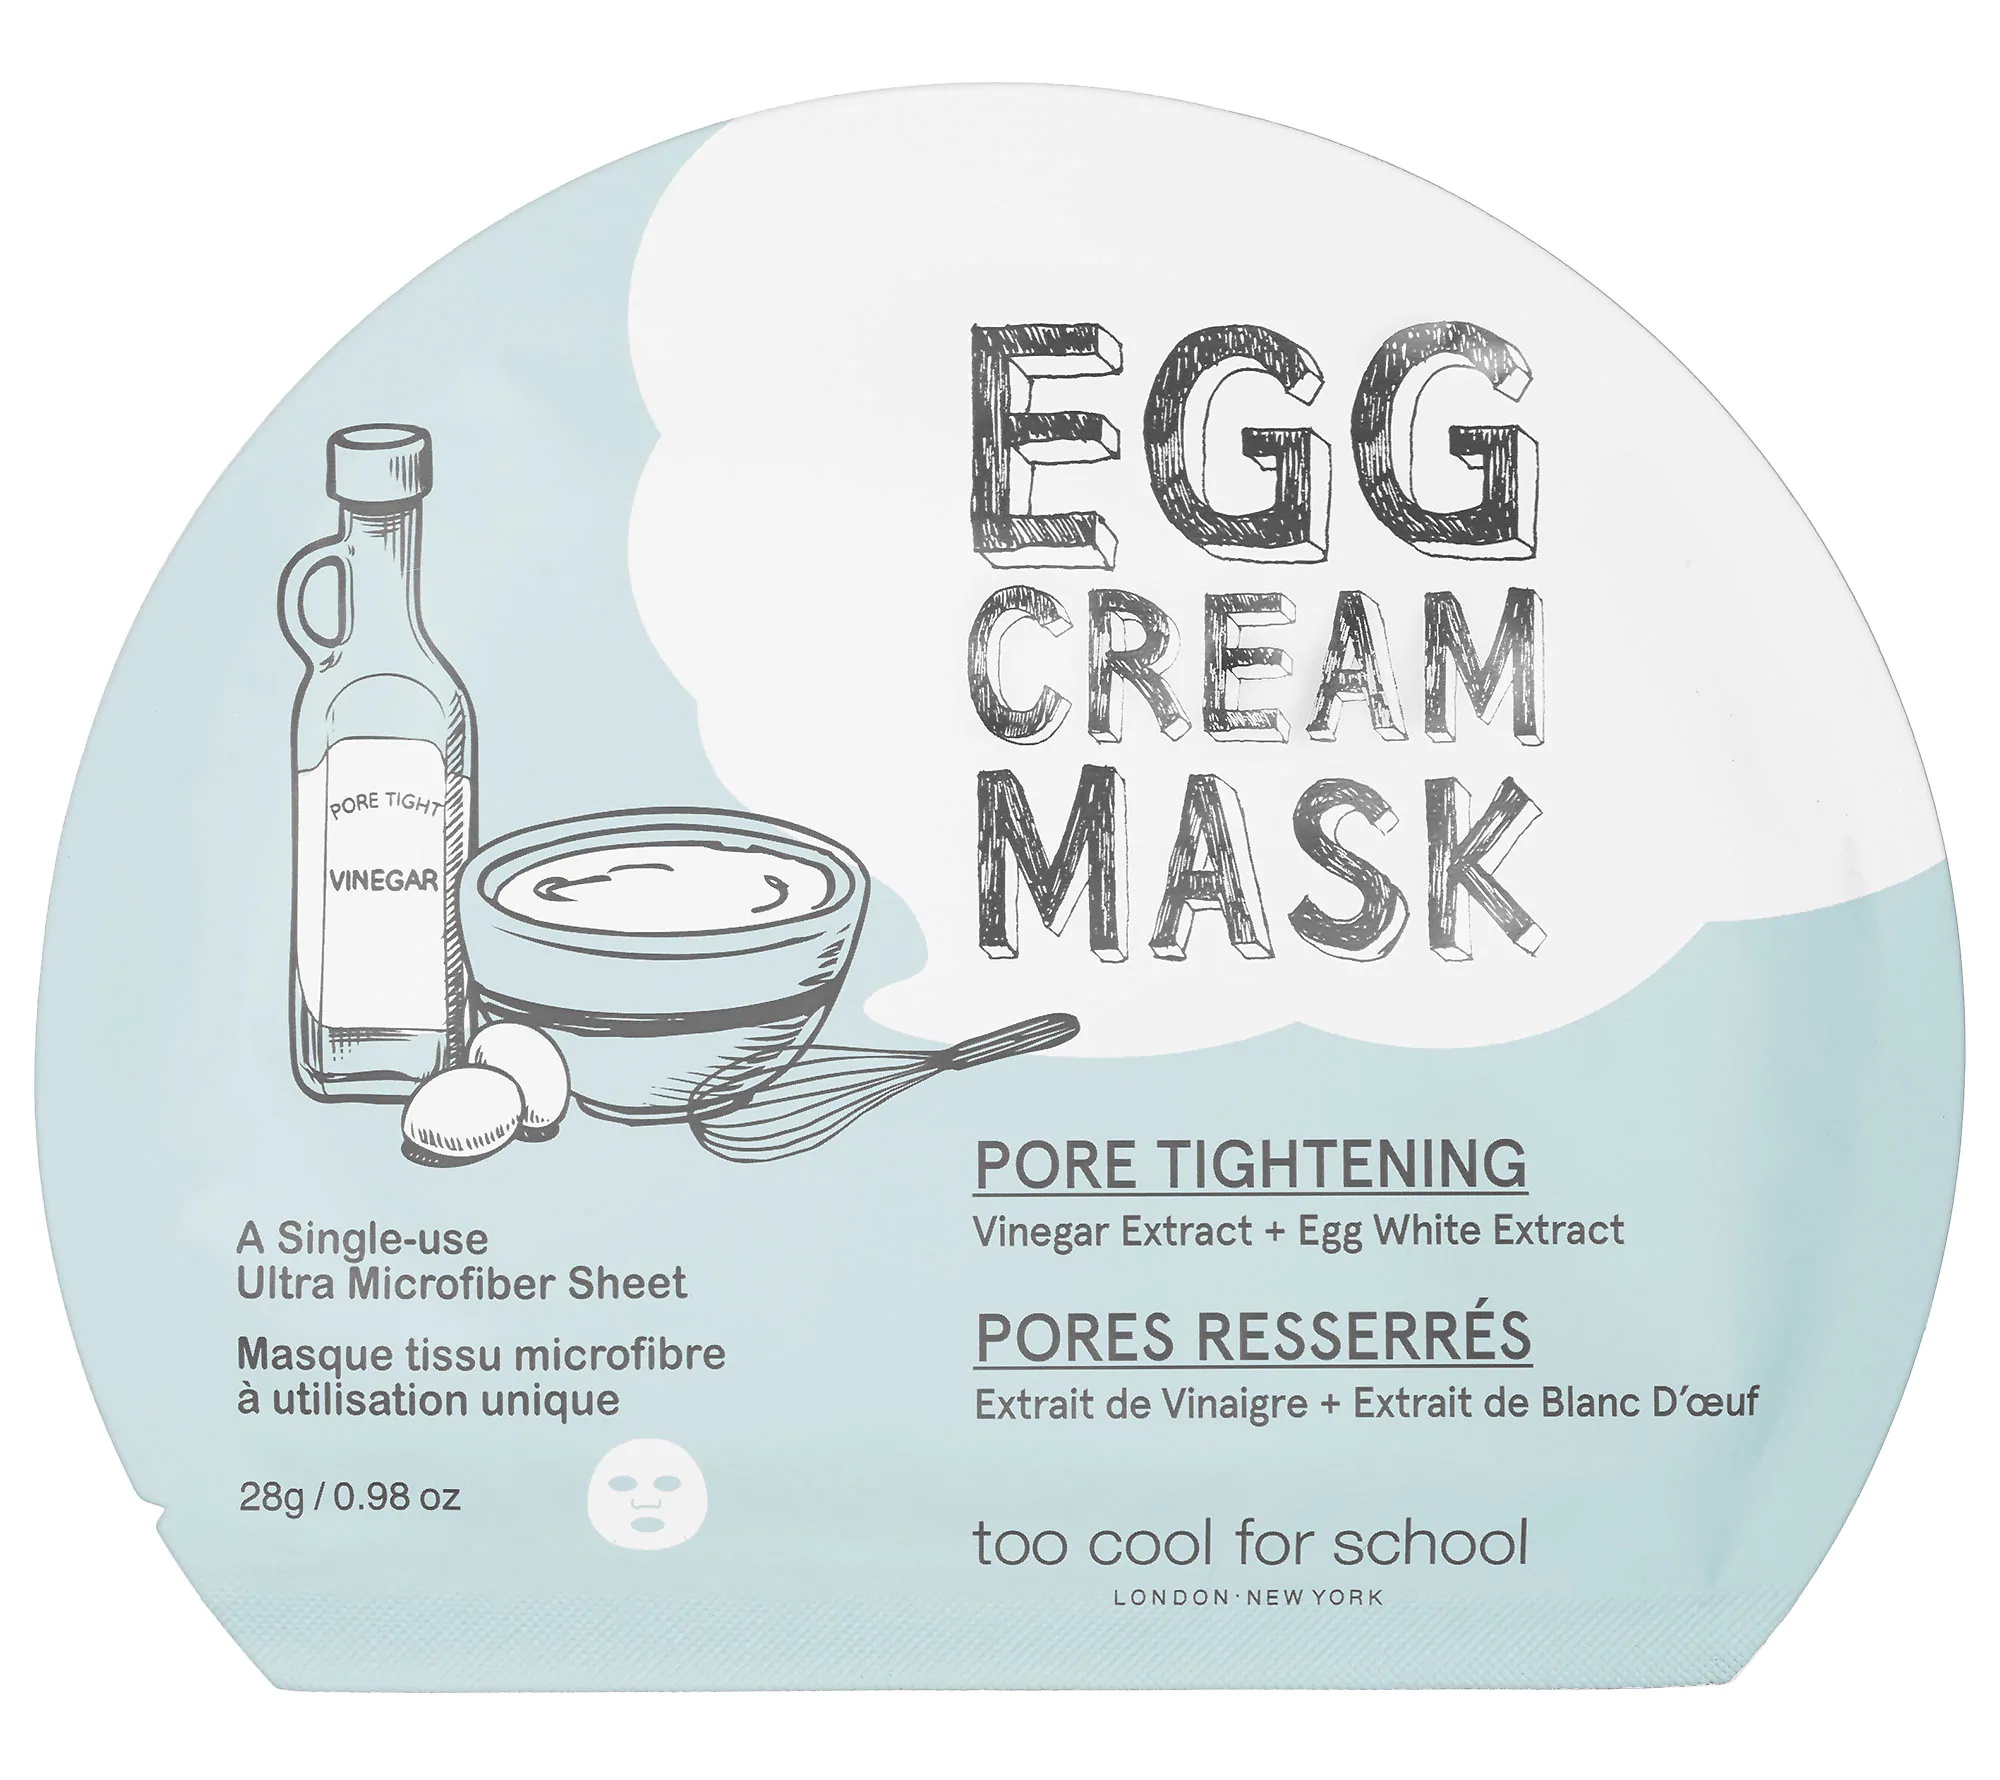 Too Cool For School Egg Cream Mask Pore Tightening